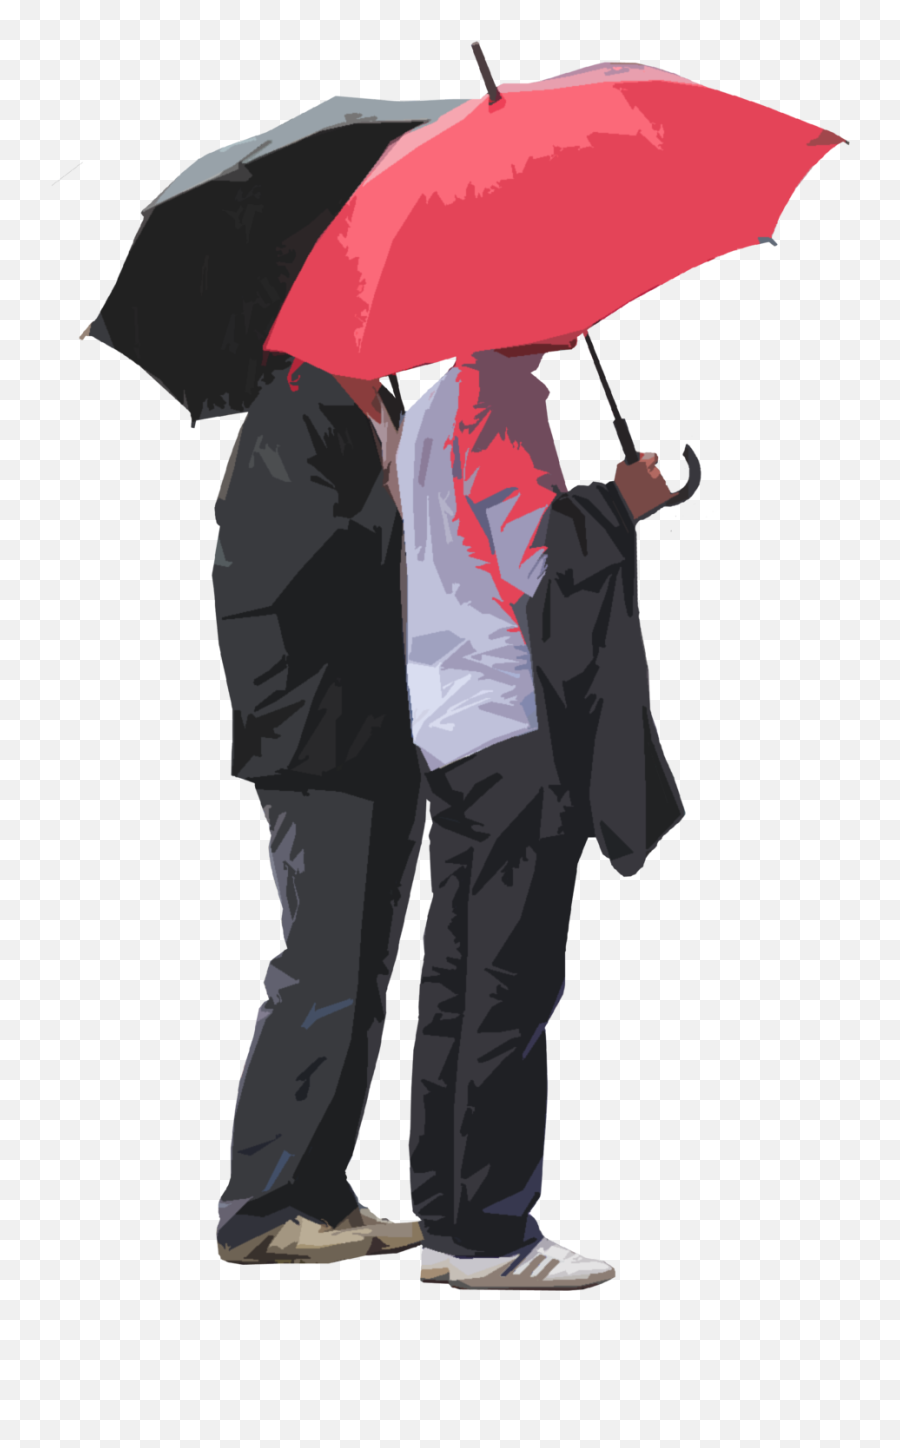 Png People With Umbrellas U0026 Free Umbrellaspng - People In Rain Png,Umbrella Transparent Background